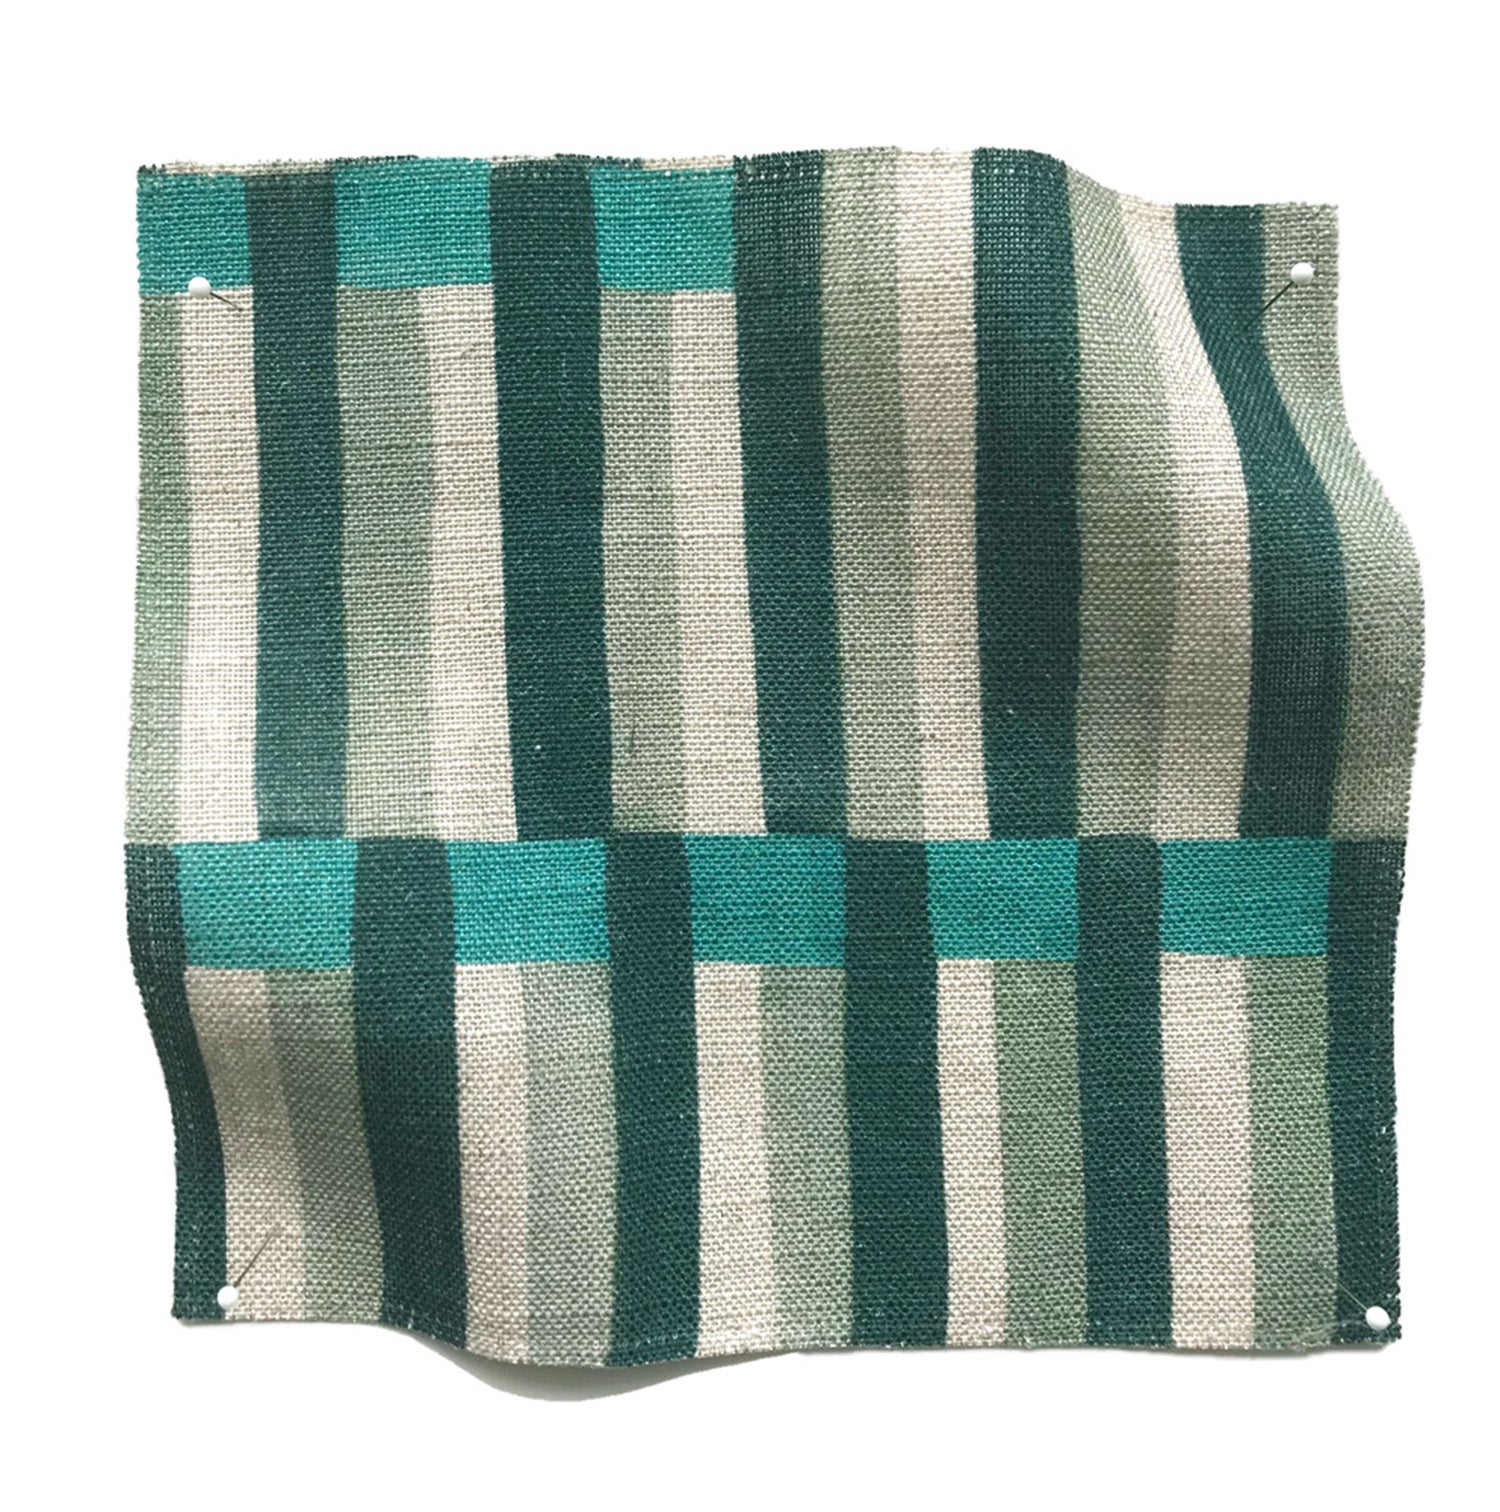 Square fabric swatch in an interlocking striped pattern in shades of turquoise, green and cream.